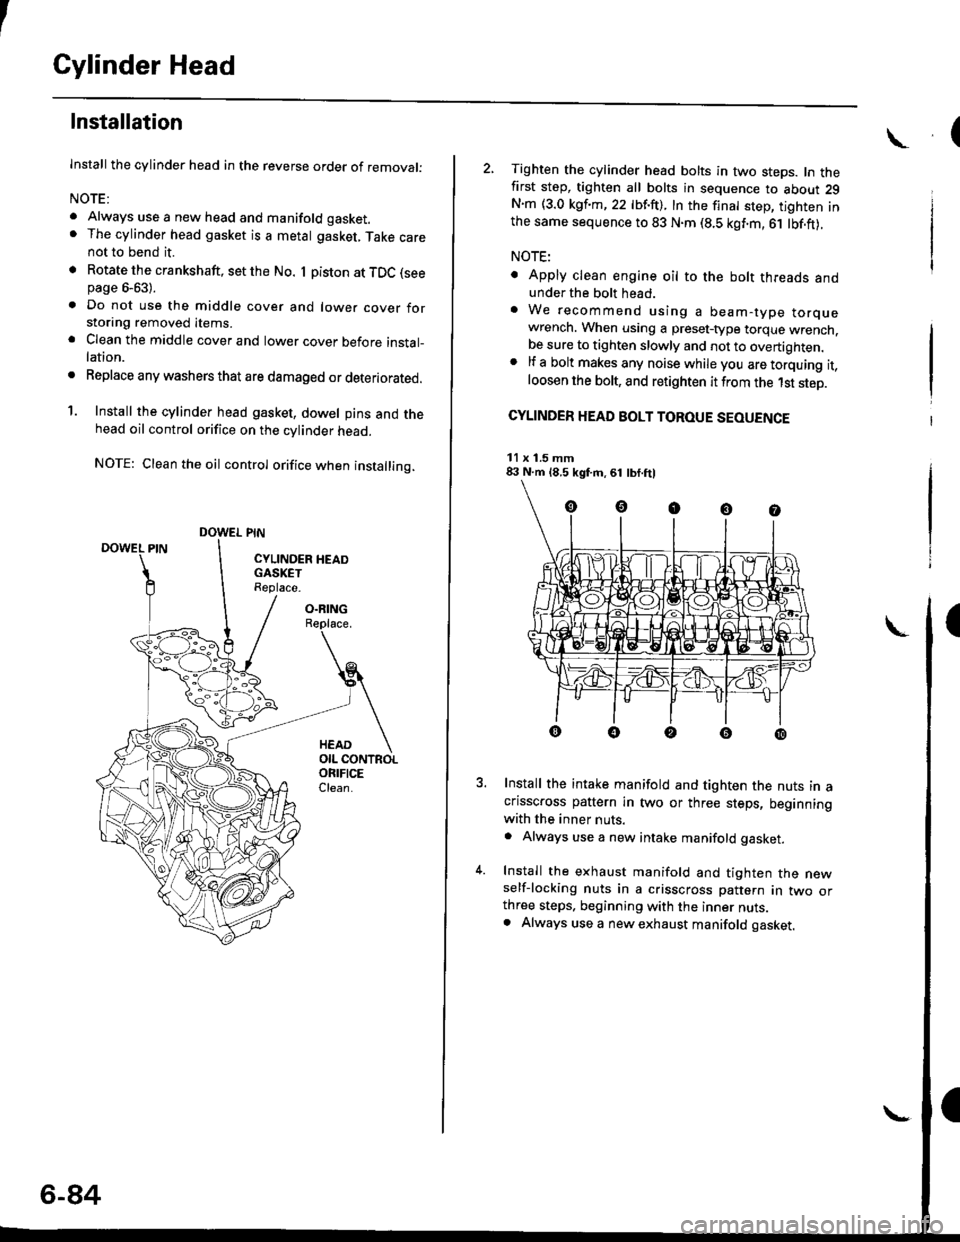 HONDA CIVIC 1997 6.G Workshop Manual I
Cylinder Head
Installation
lnstall the cylinder head in the reverse order of removal:
NOTE:
. Always use a new head and manifold gasket.. The cylinder head gasket is a metal gasket, Take carenot to 